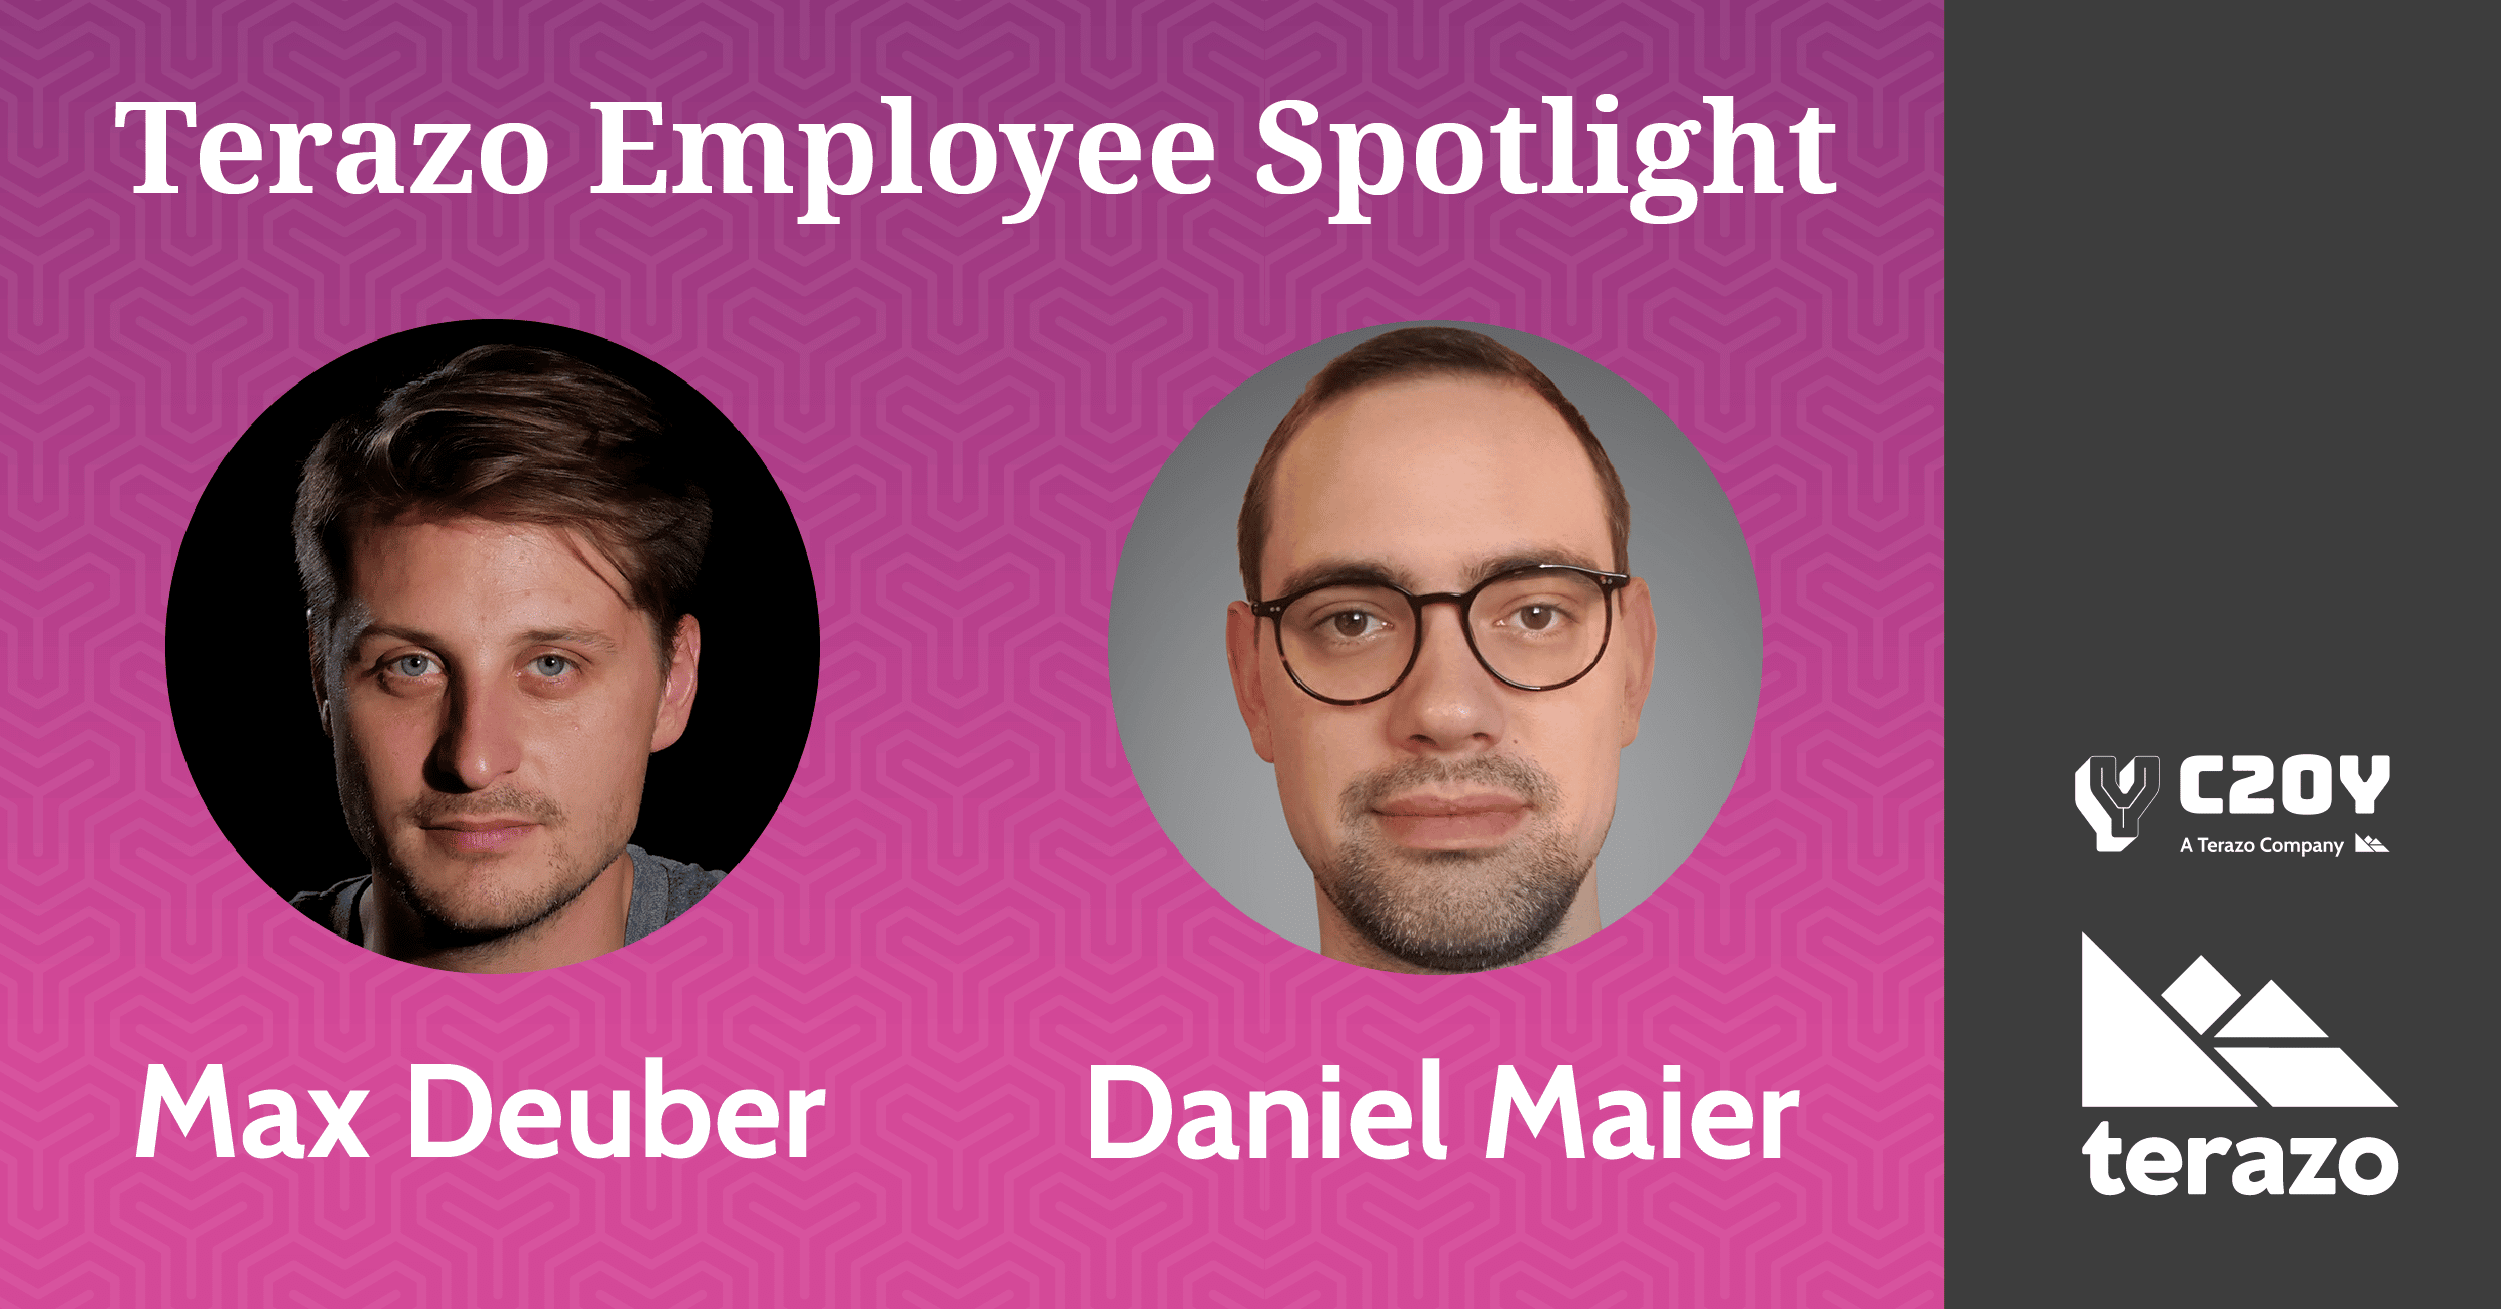 Terazo employee spotlight with Max Deuber and Daniel Maier